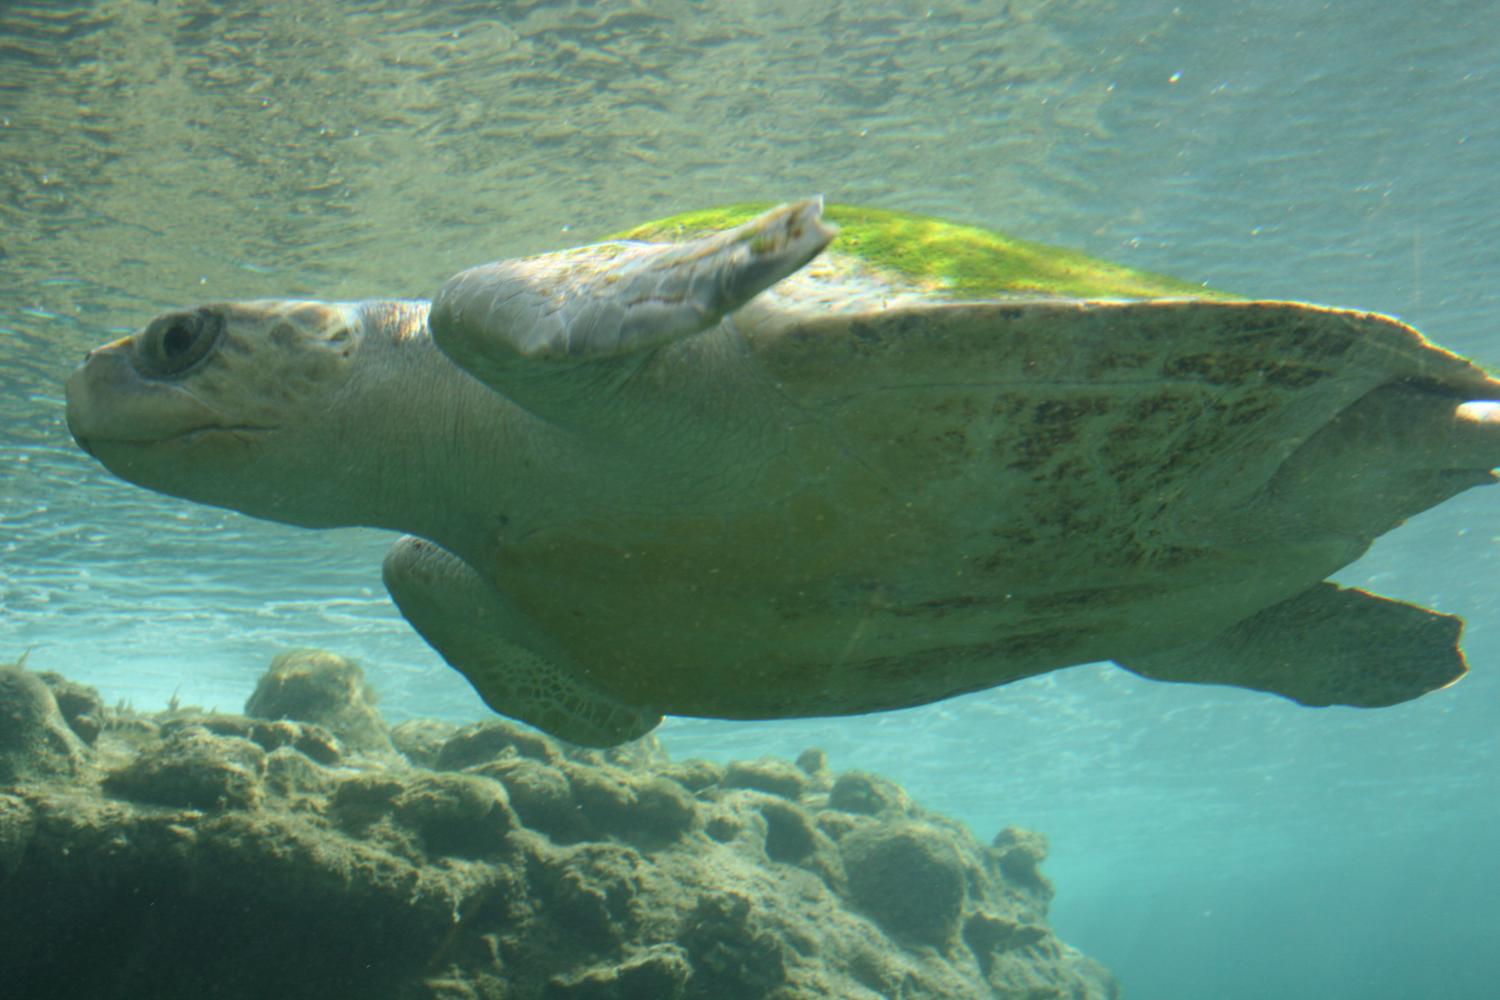 Plastic creates 'evolutionary trap' for young sea turtles